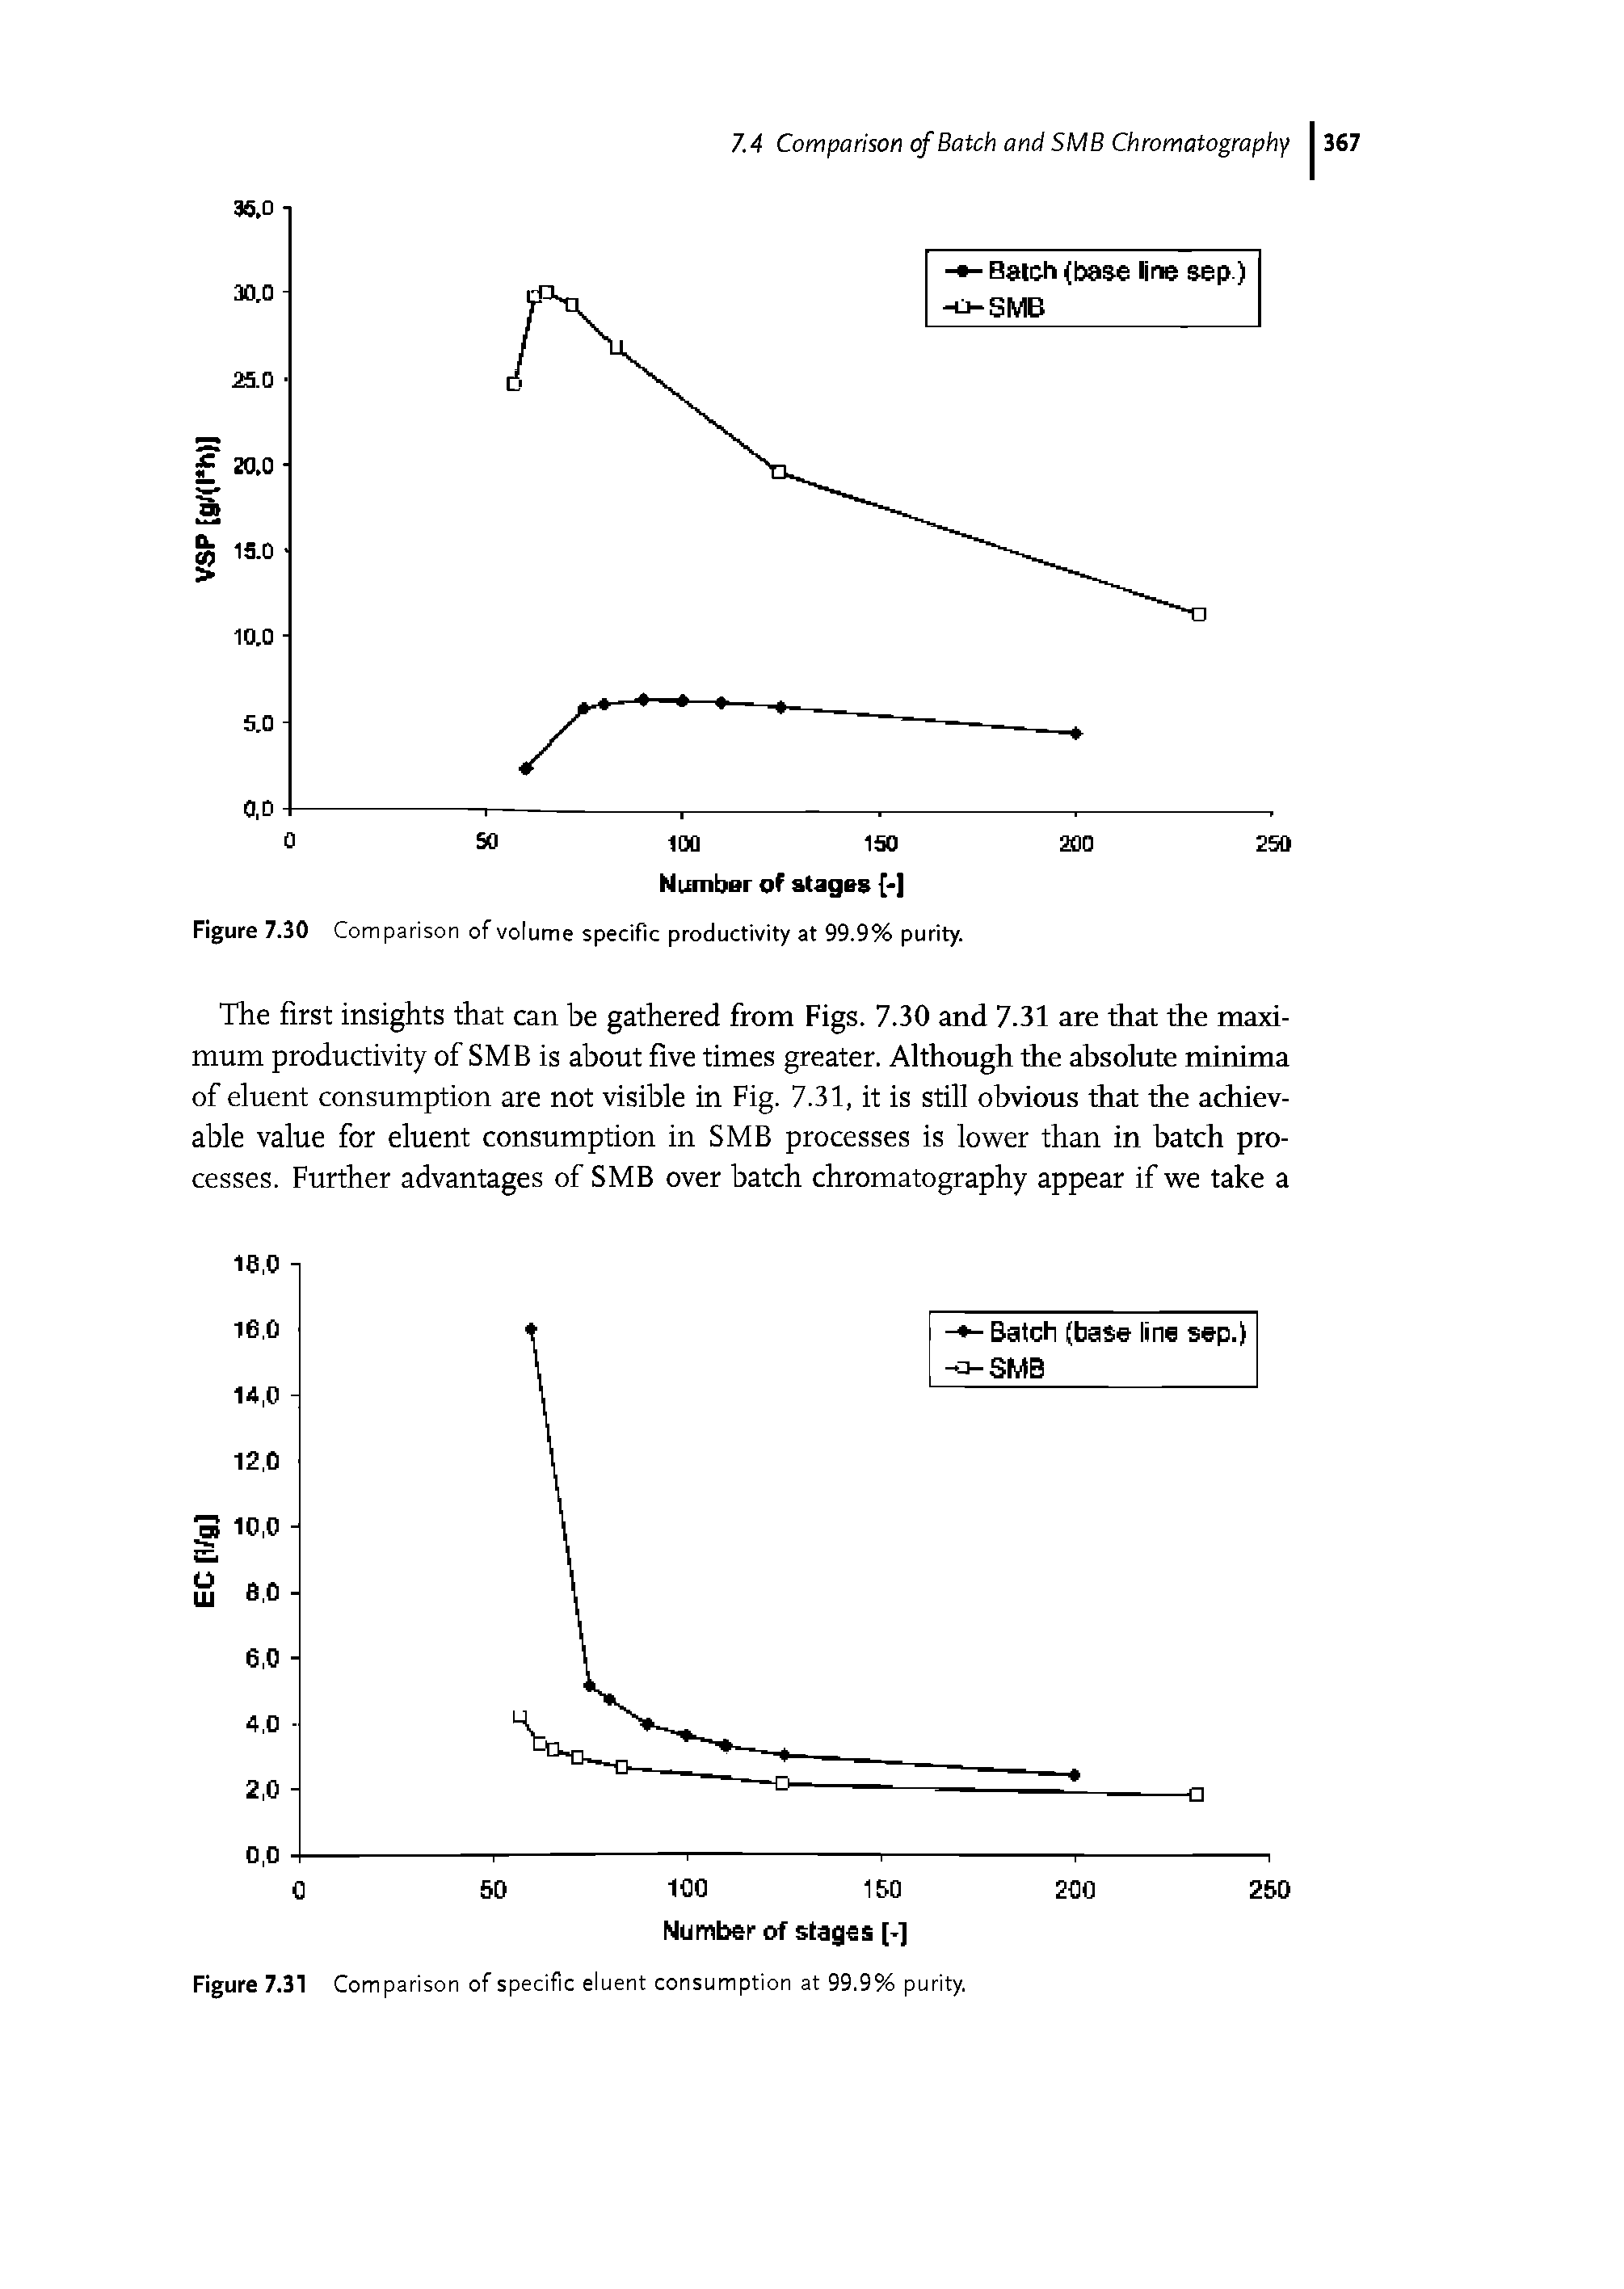 Figure 7.30 Comparison of volume specific productivity at 99.9% purity.